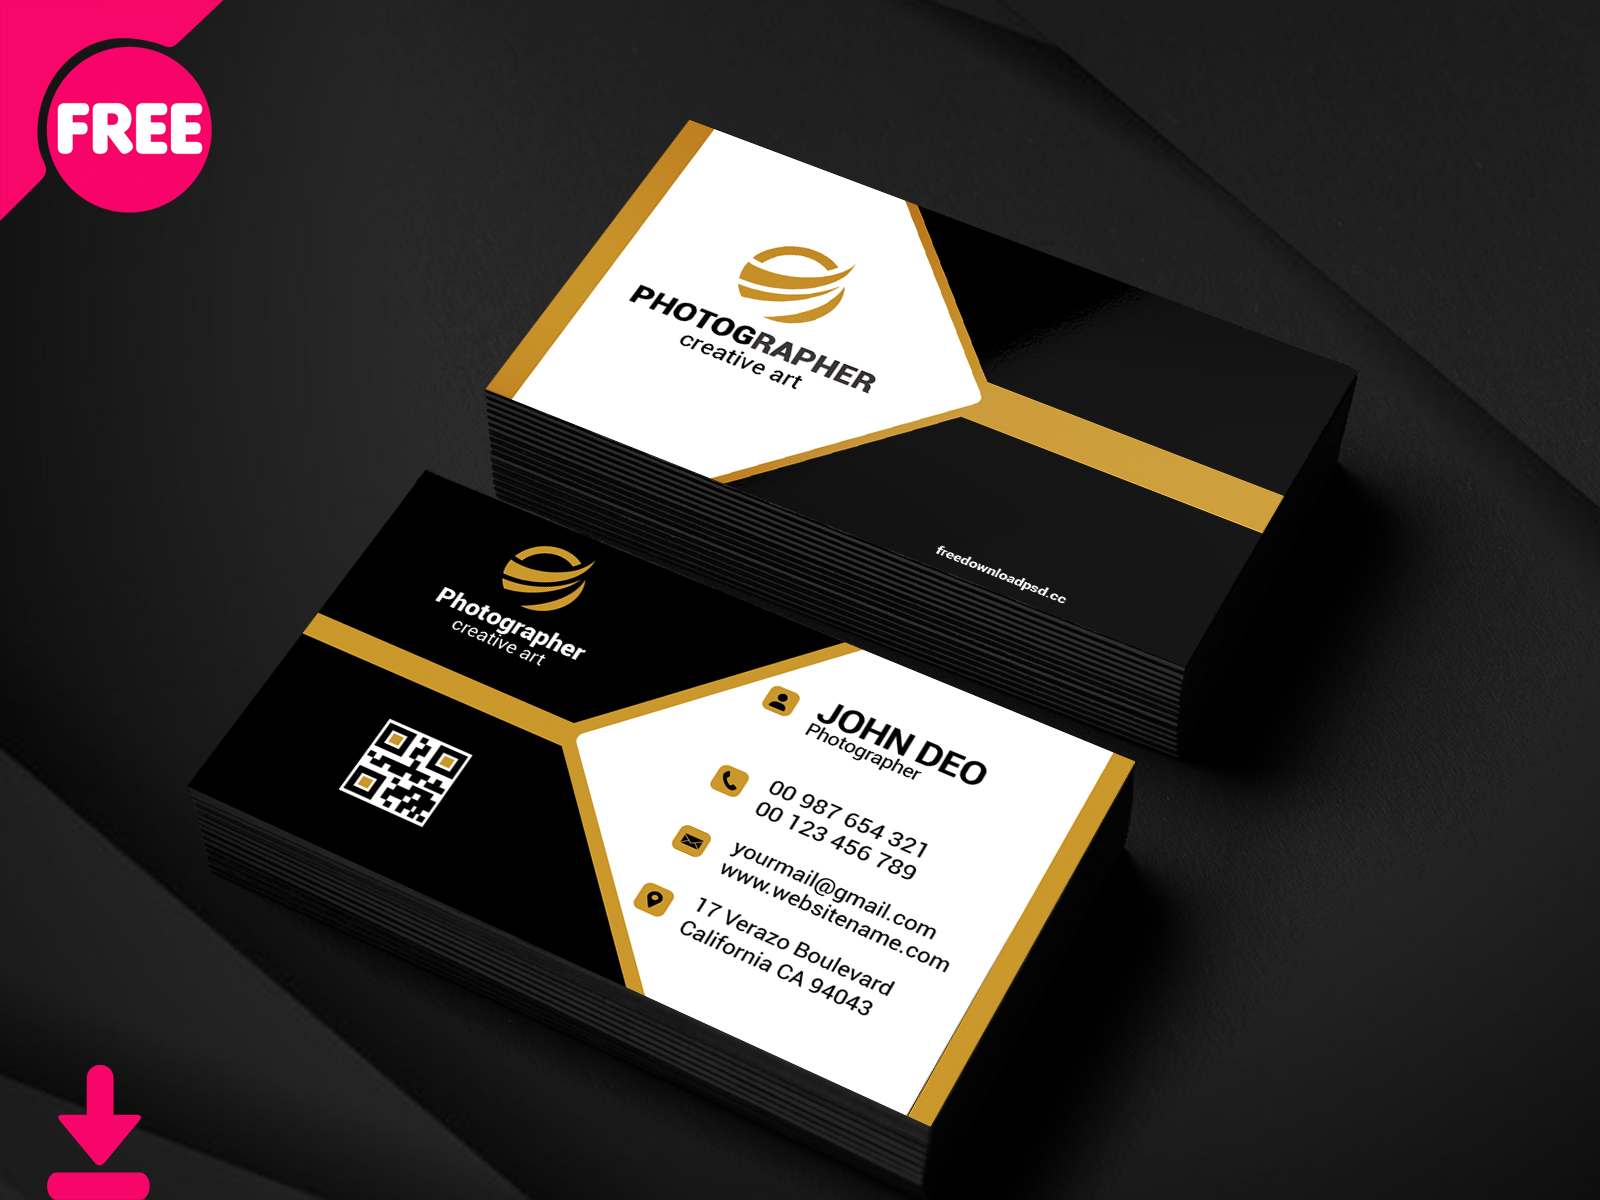 Free Sample Photography Business Card Psd Template Cover by Sheikh In Free Business Card Templates For Photographers